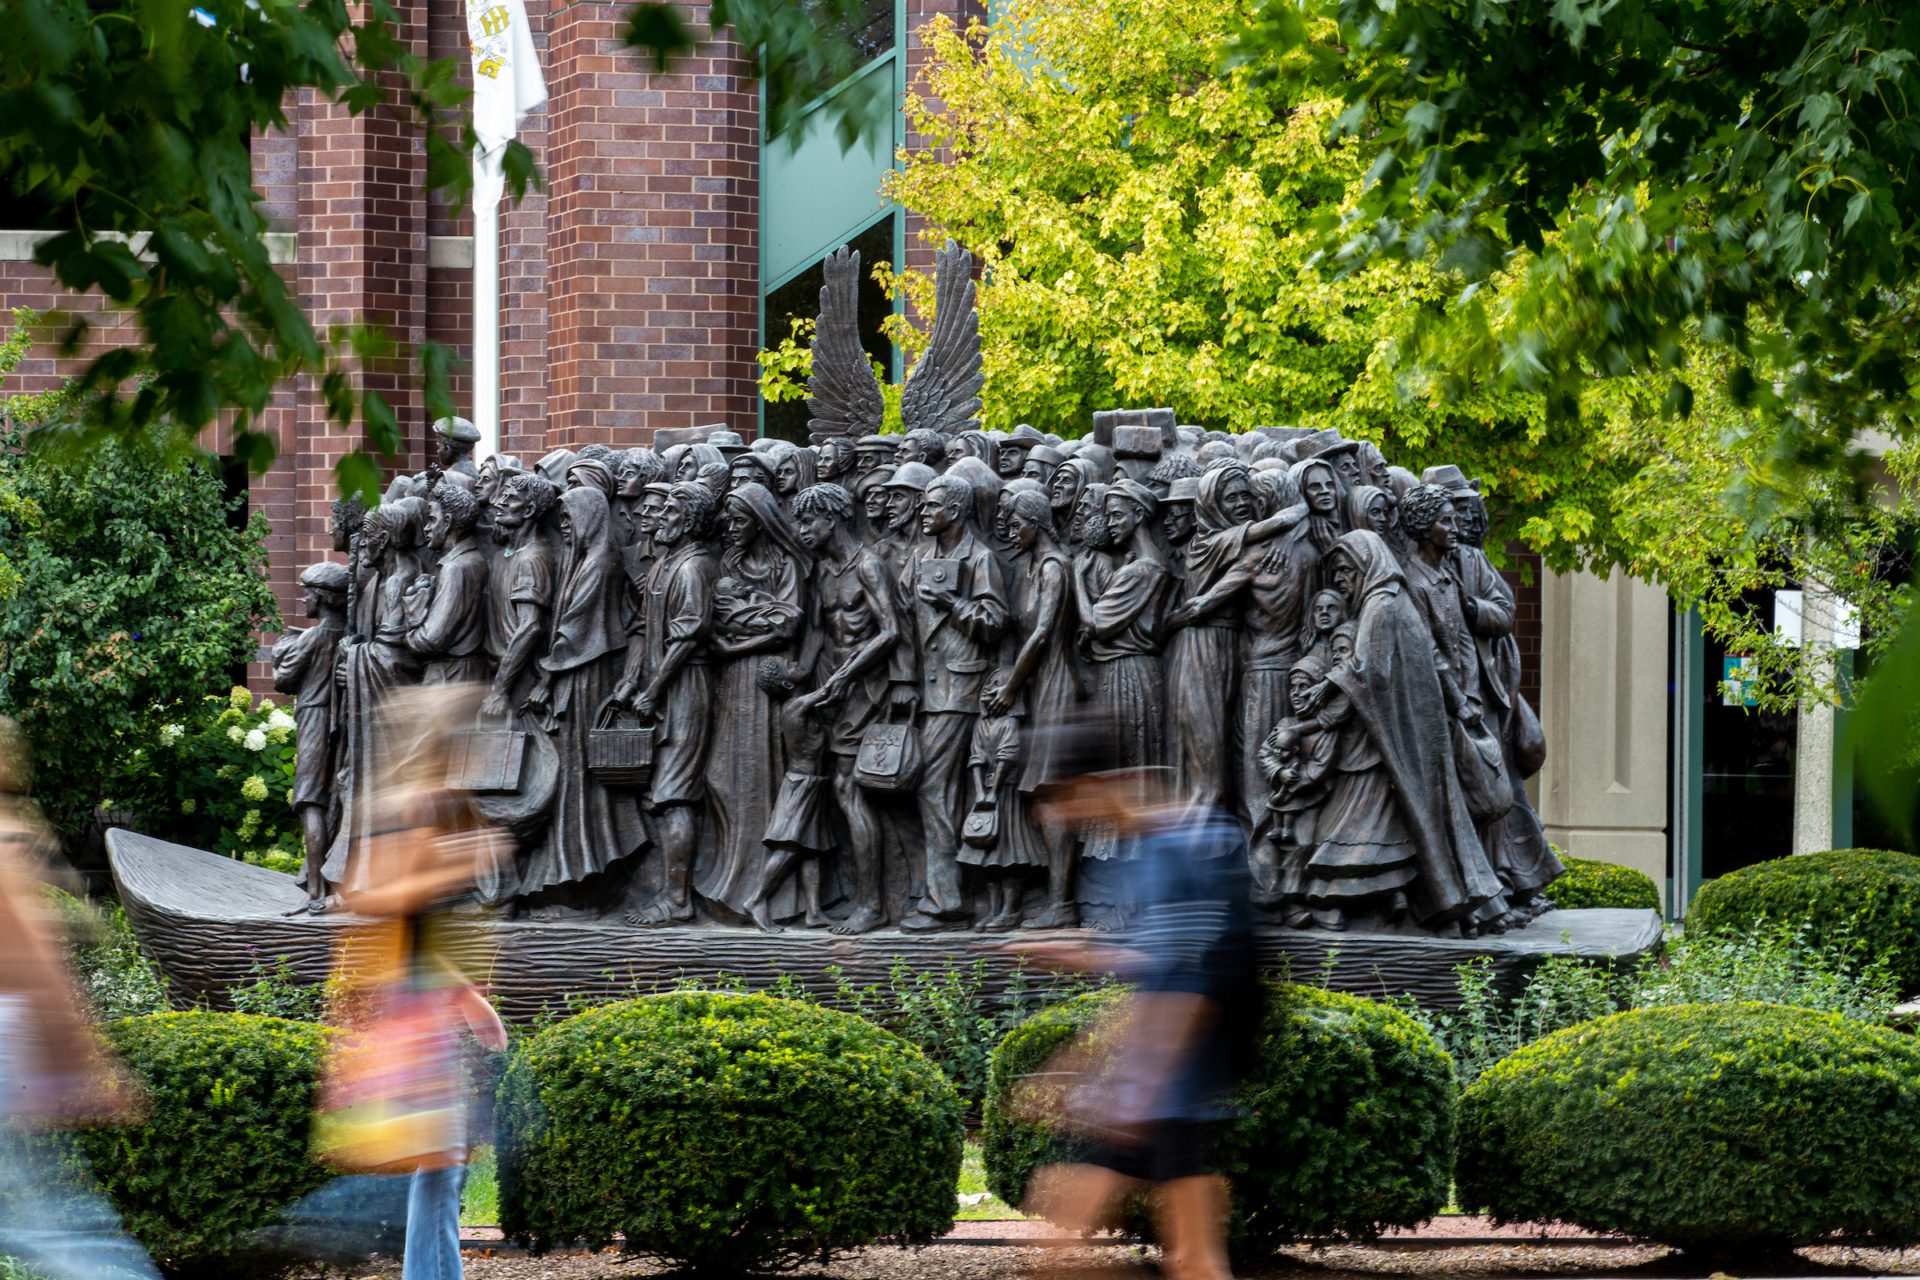 Blurred students pass a large bronze statue depicting a large group of migrants with a pair of angel wings behind them